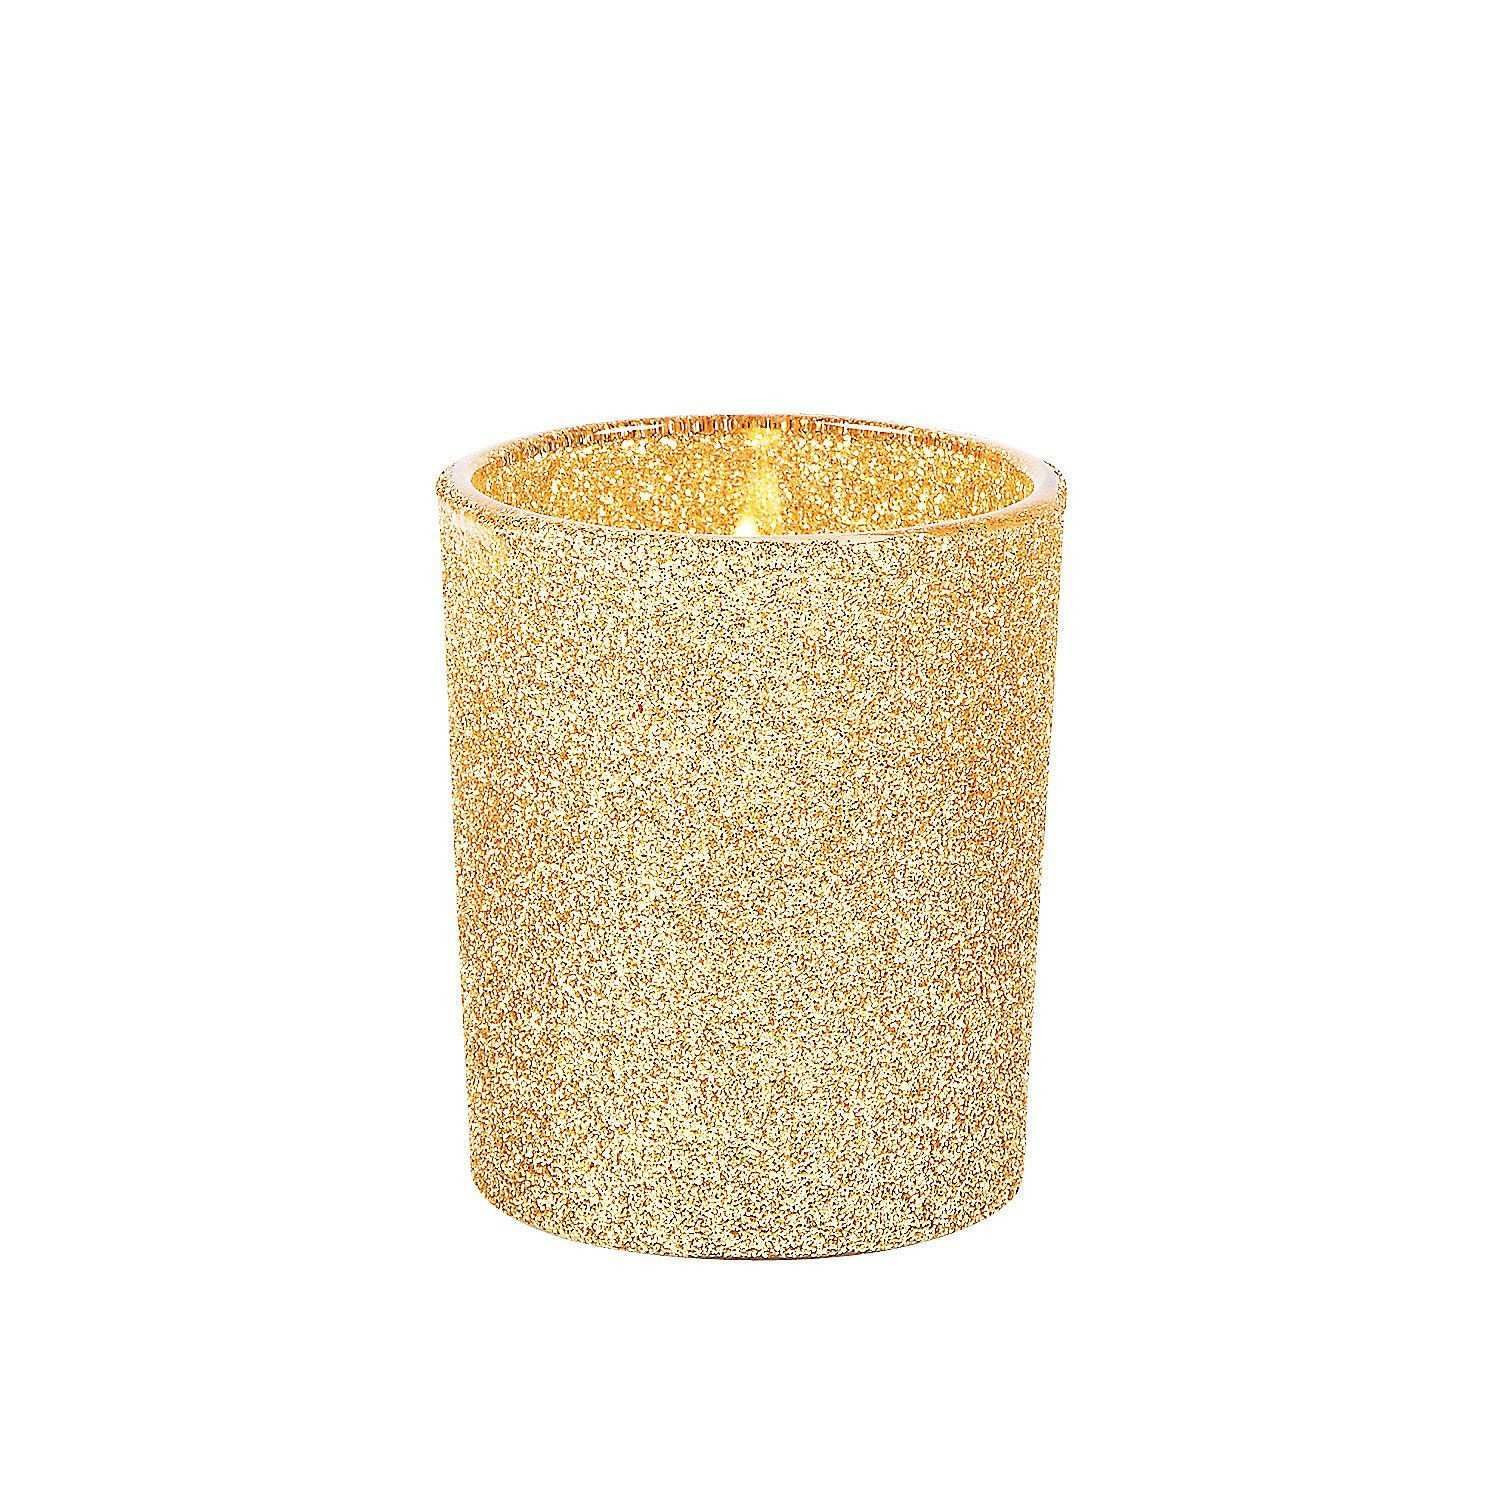 24 Perfect Discount Mercury Glass Vases 2024 free download discount mercury glass vases of gold mercury glass vases awesome inspiration gold votive candles inside gold mercury glass vases awesome inspiration gold votive candles with gold glitter vot